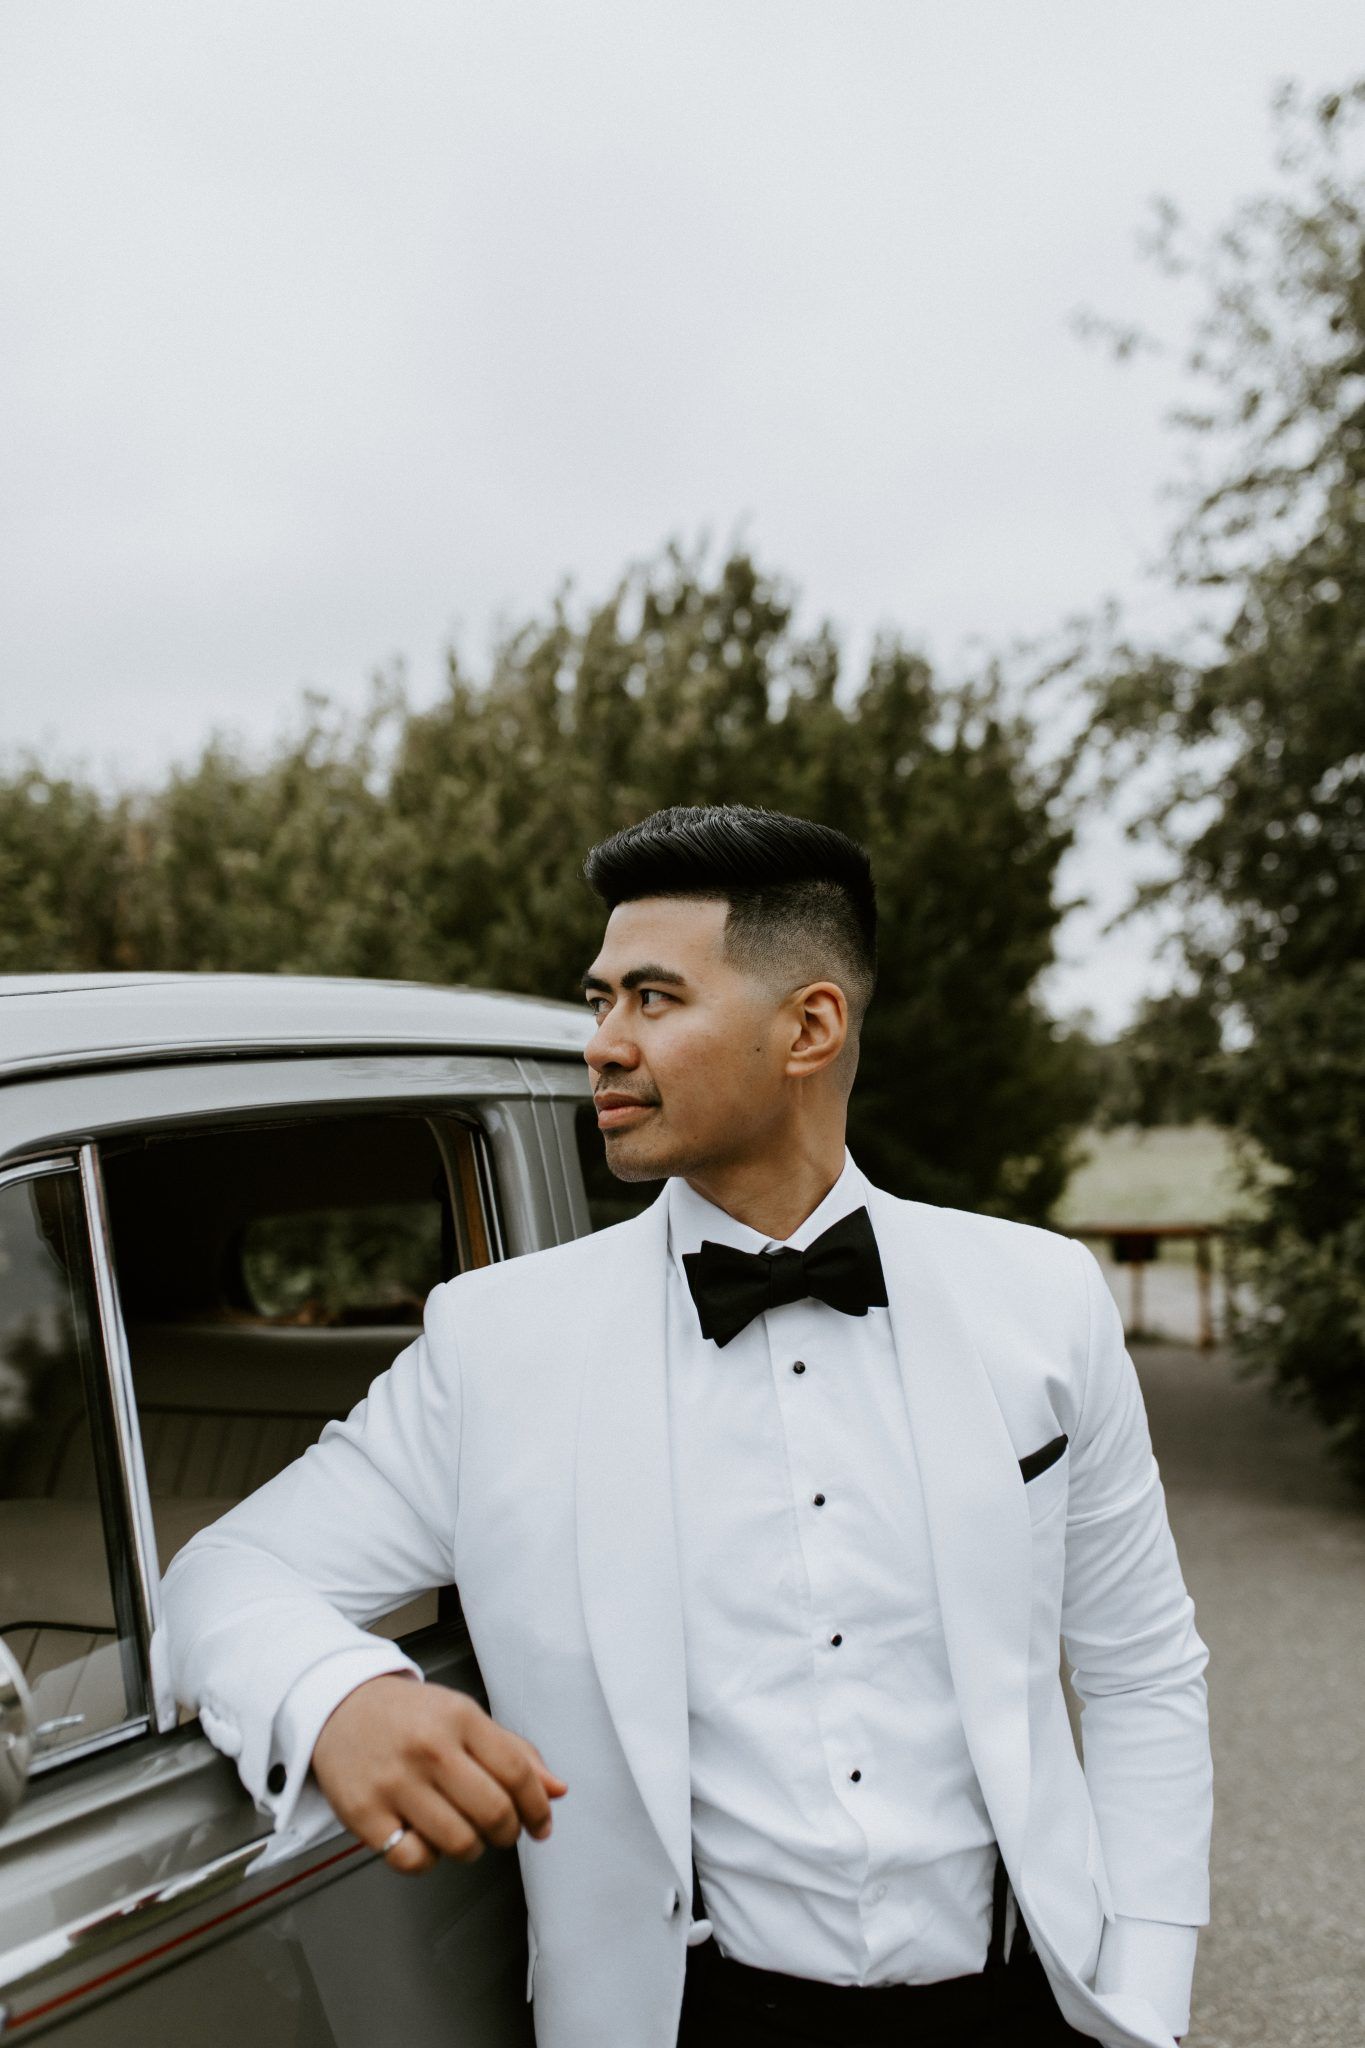 Looking Dapper: 10 Looks for the Modern Groom - on the Bronte Bride Blog, groom style, Calgary Wedding Inspiration Blog, white suit